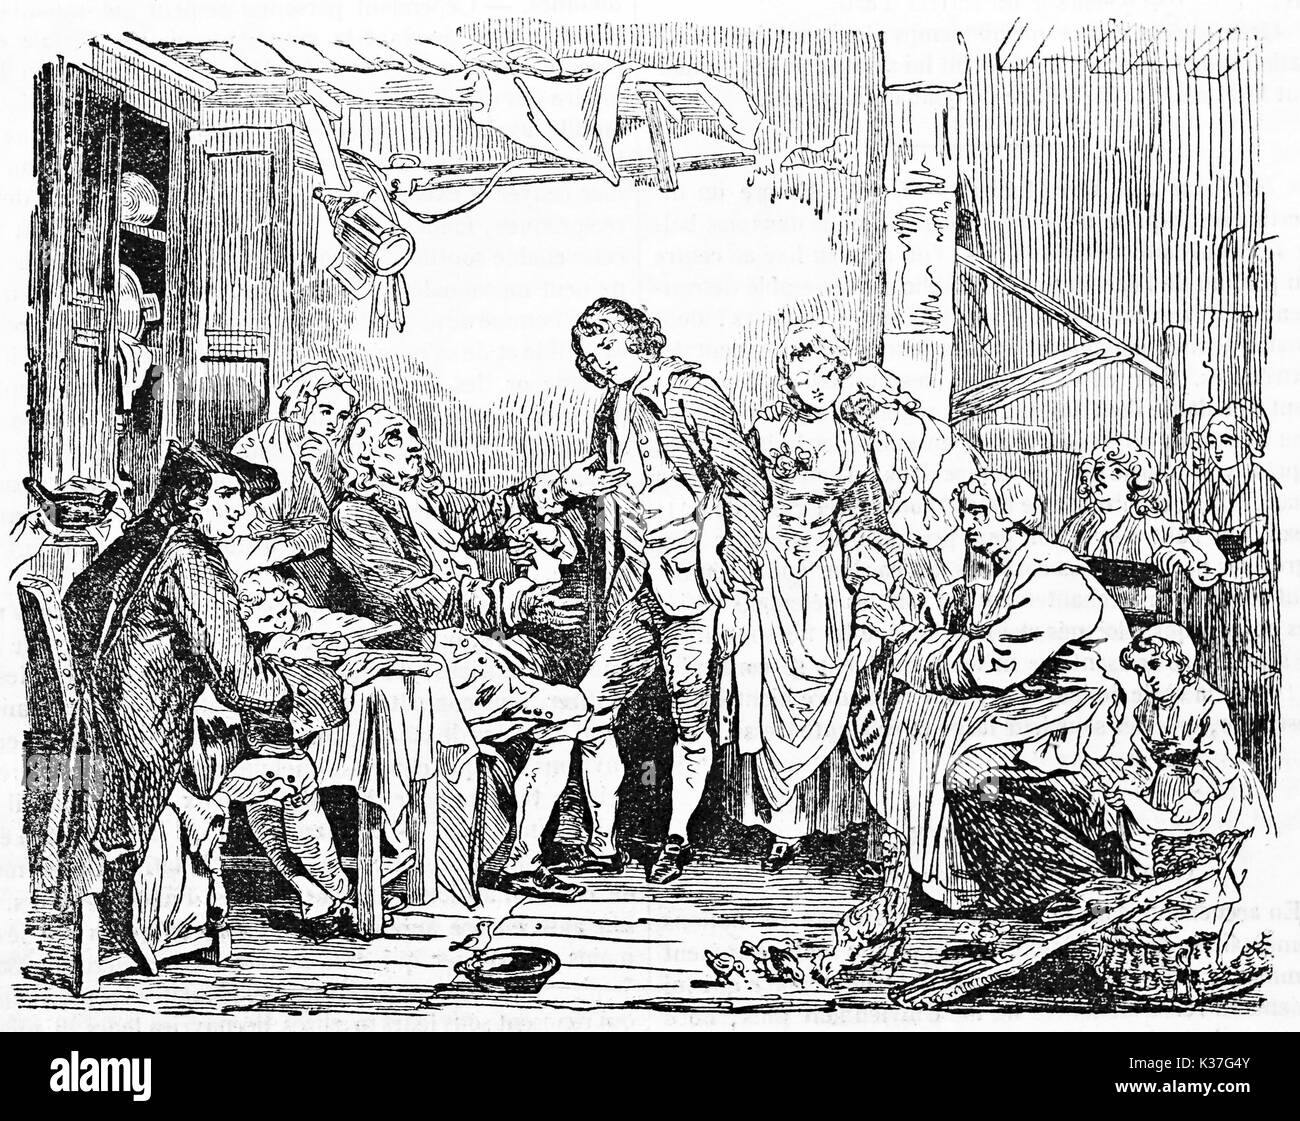 Stipulation of an ancient marriage contract in a room full of people wearing ancient clothes. Old illustration by J.B. Greuze, published on Magasin Pittoresque, Paris, 1834 Stock Photo